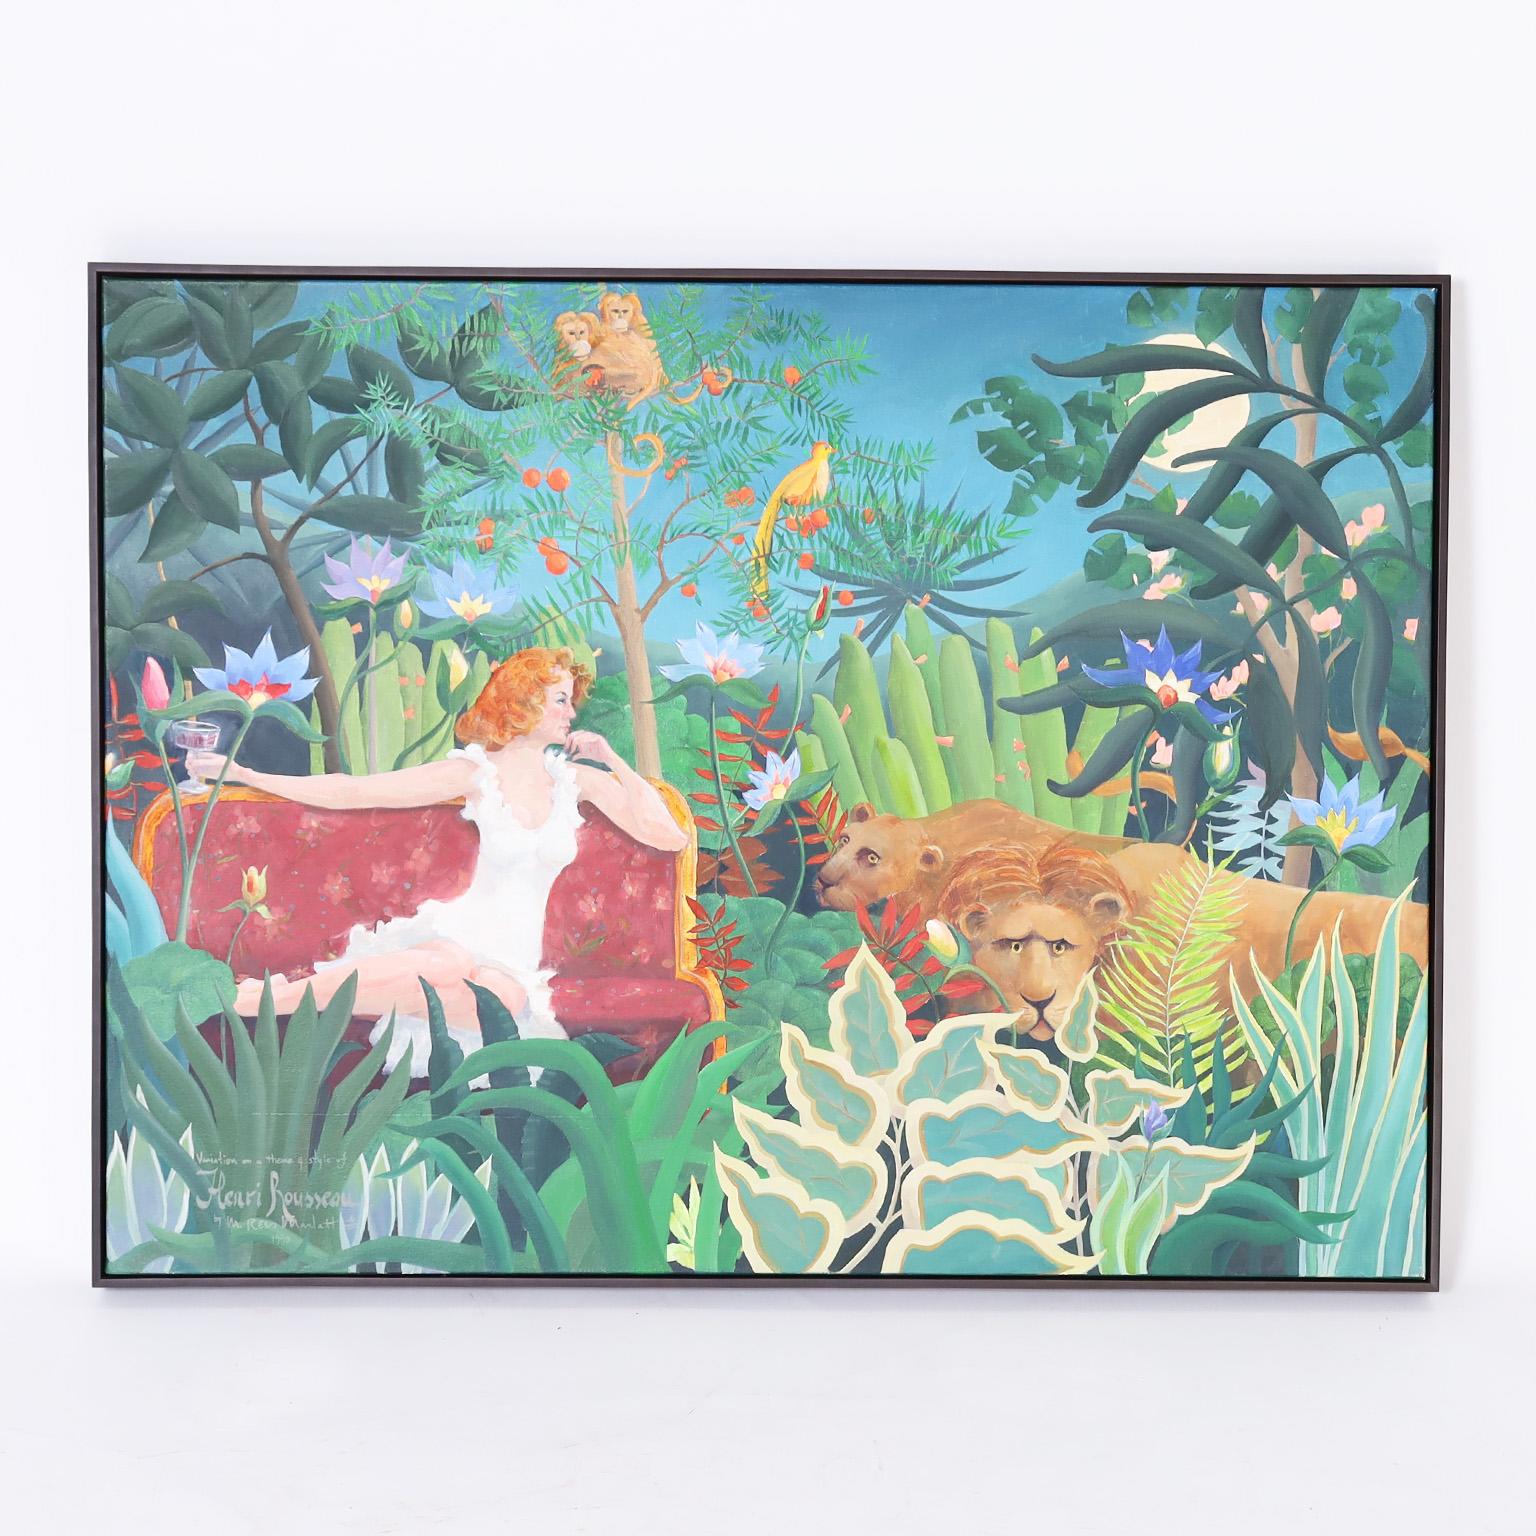 Unknown Figurative Painting - Painting on Canvas of a Jungle with Cats, Monkeys, and a Woman